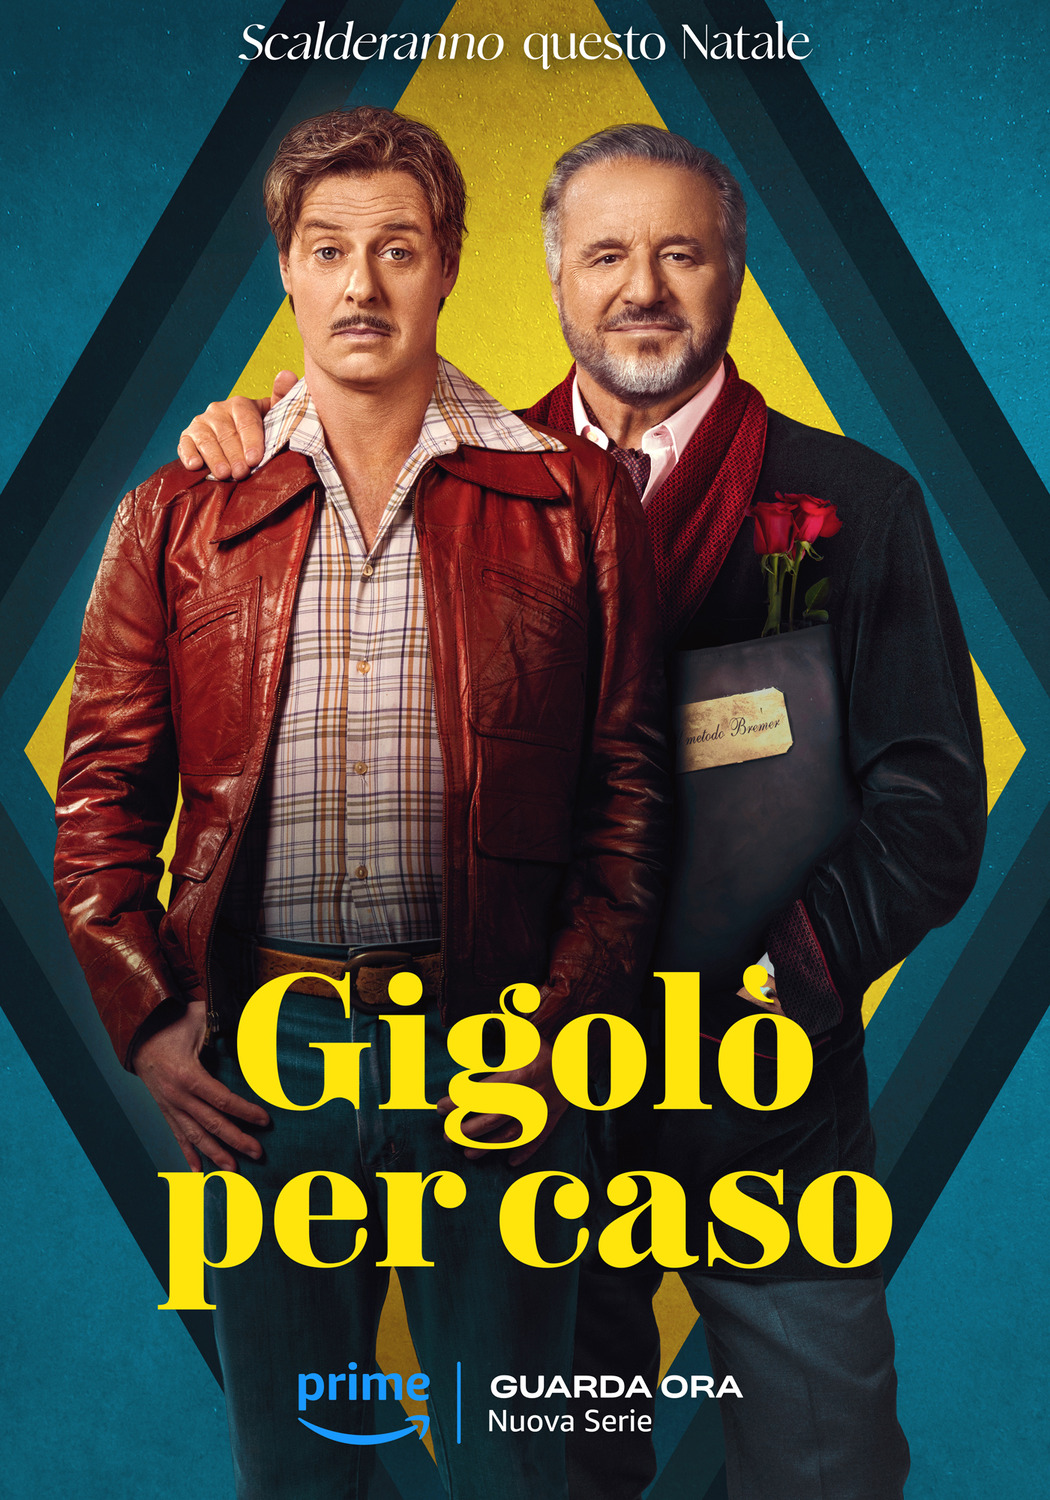 Extra Large TV Poster Image for Gigolò per caso (#4 of 4)